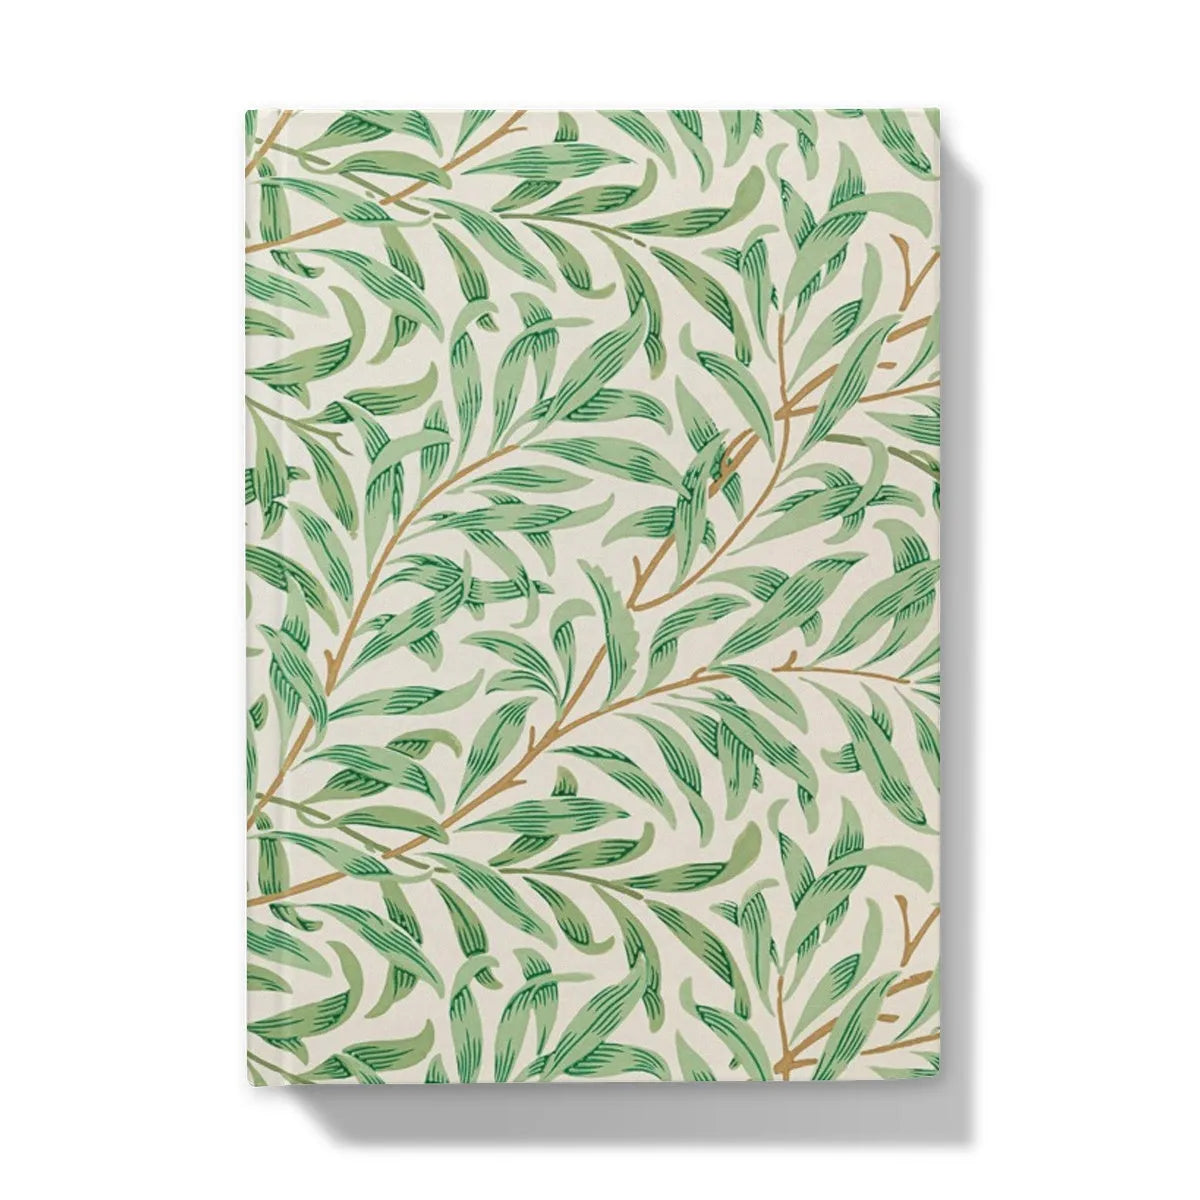 Willow Bough By William Morris Hardback Journal - 5’x7’ / Lined - Notebooks & Notepads - Aesthetic Art